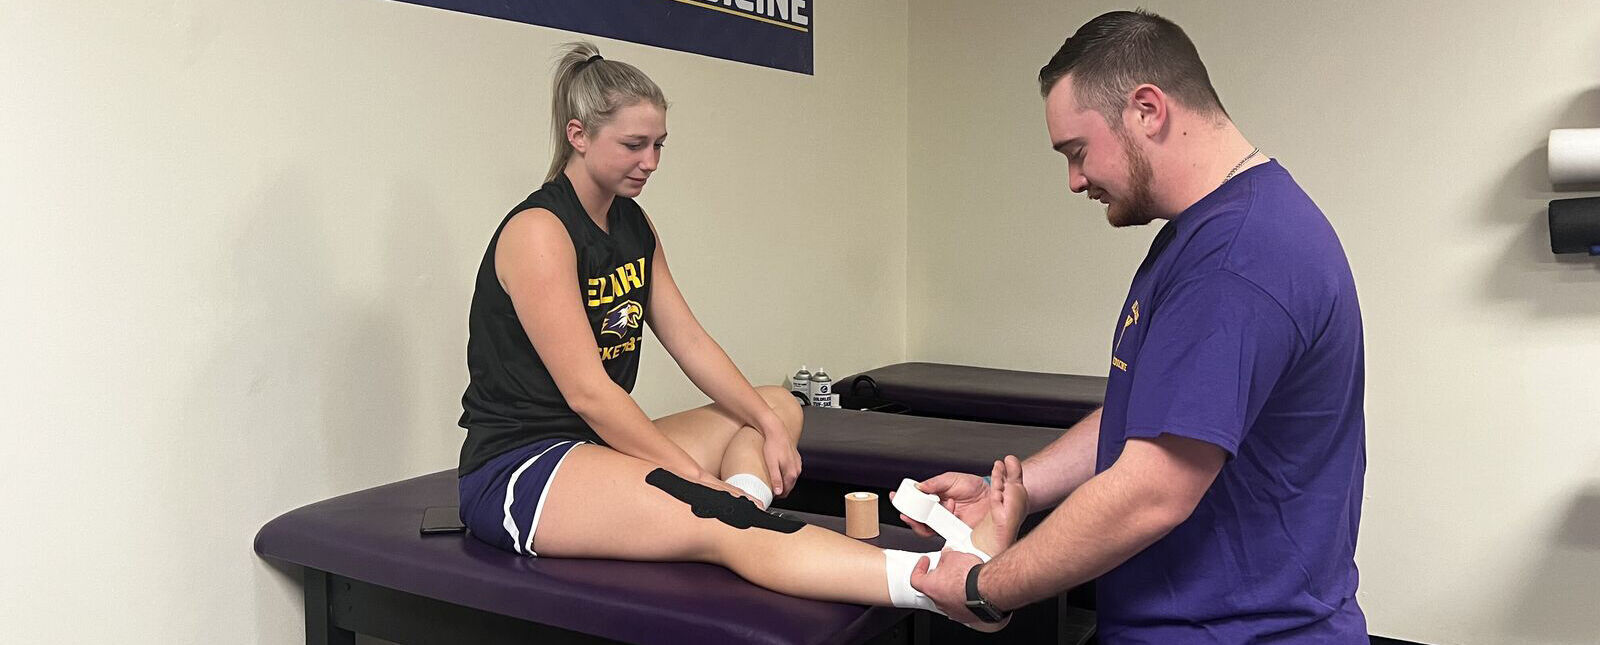 A male trainer tapes up the ankle of a female student athlete